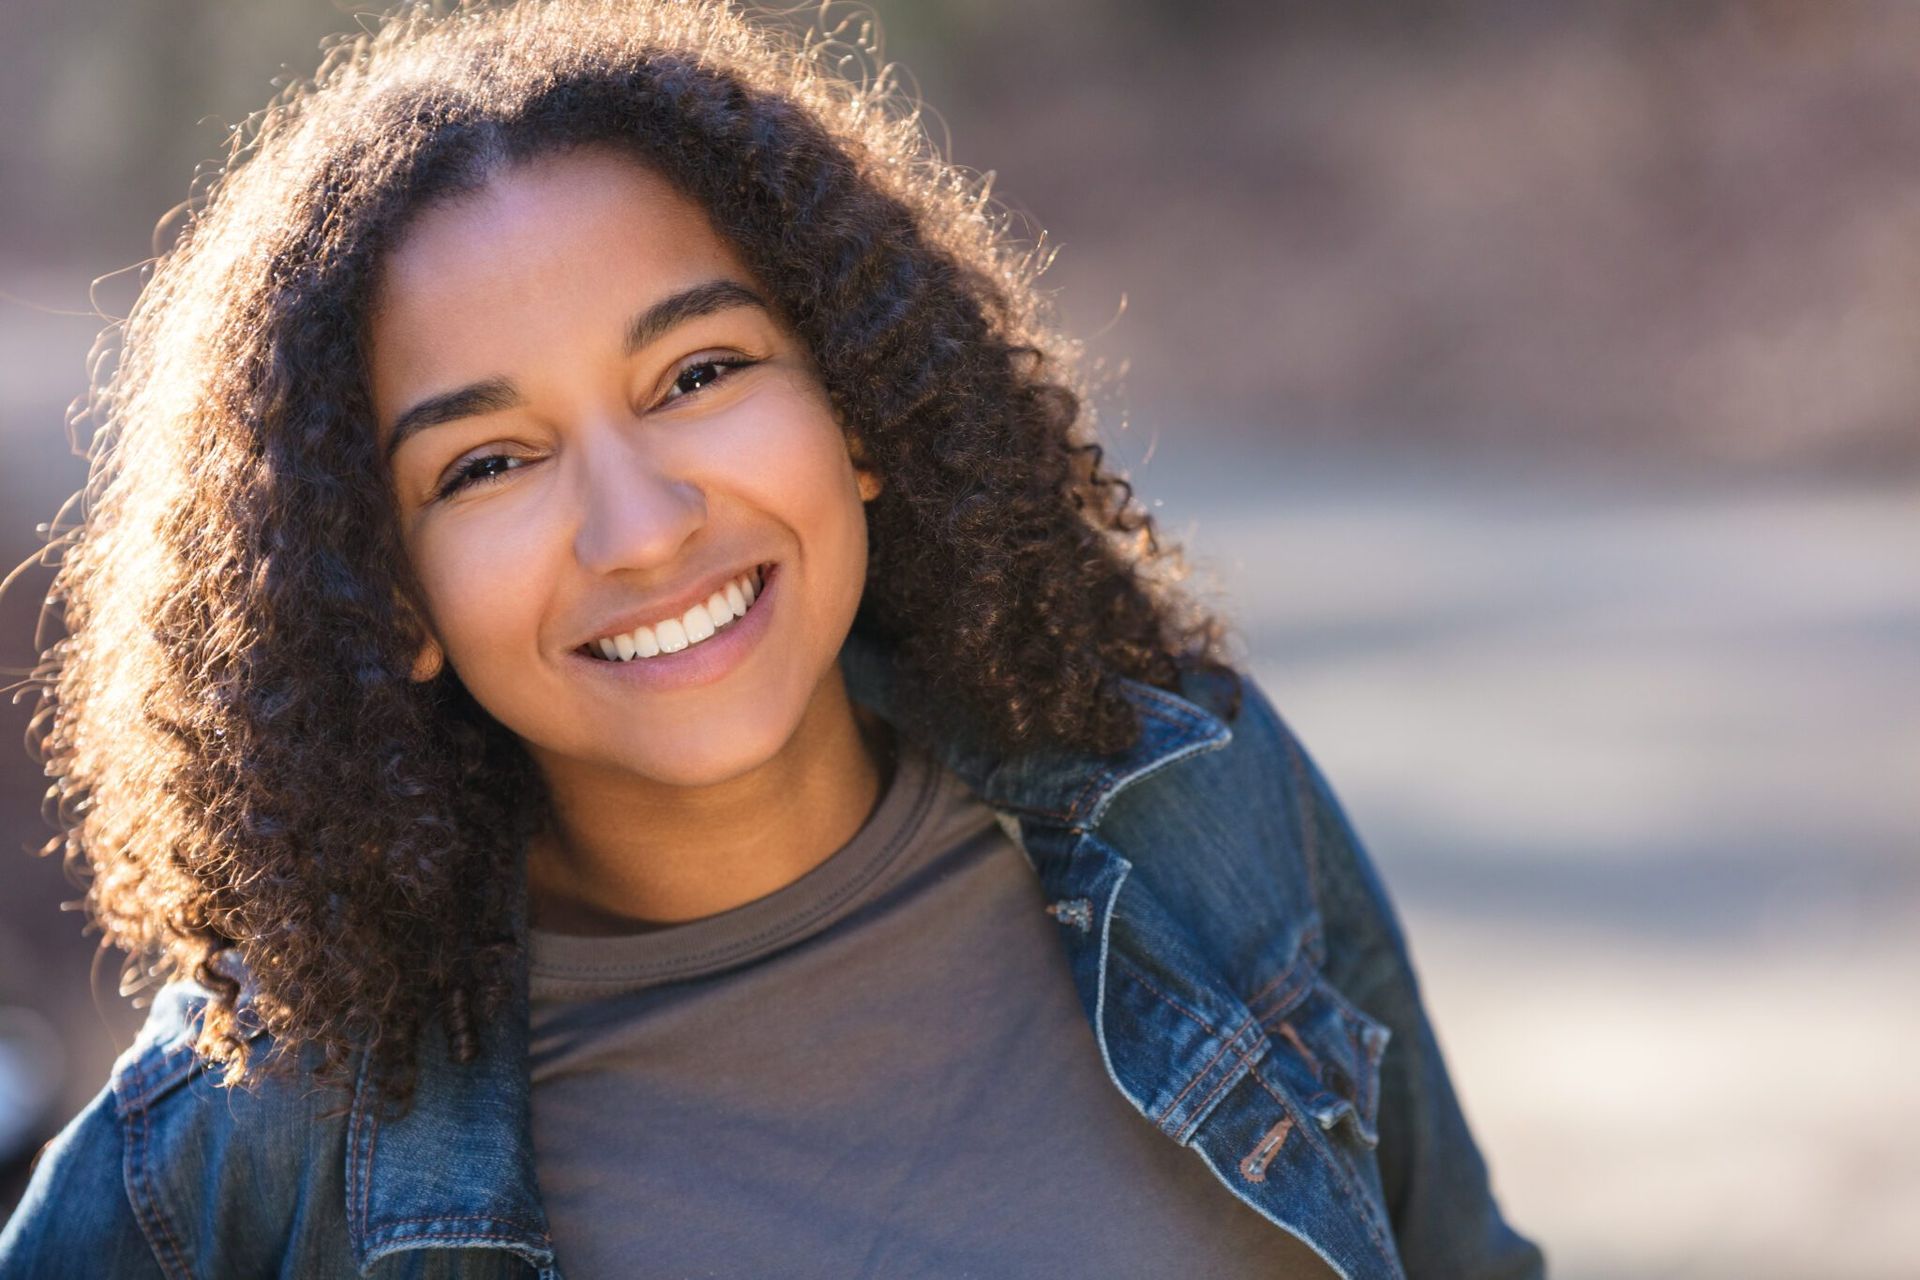 a young woman with curly hair is smiling and wearing a denim jacket .